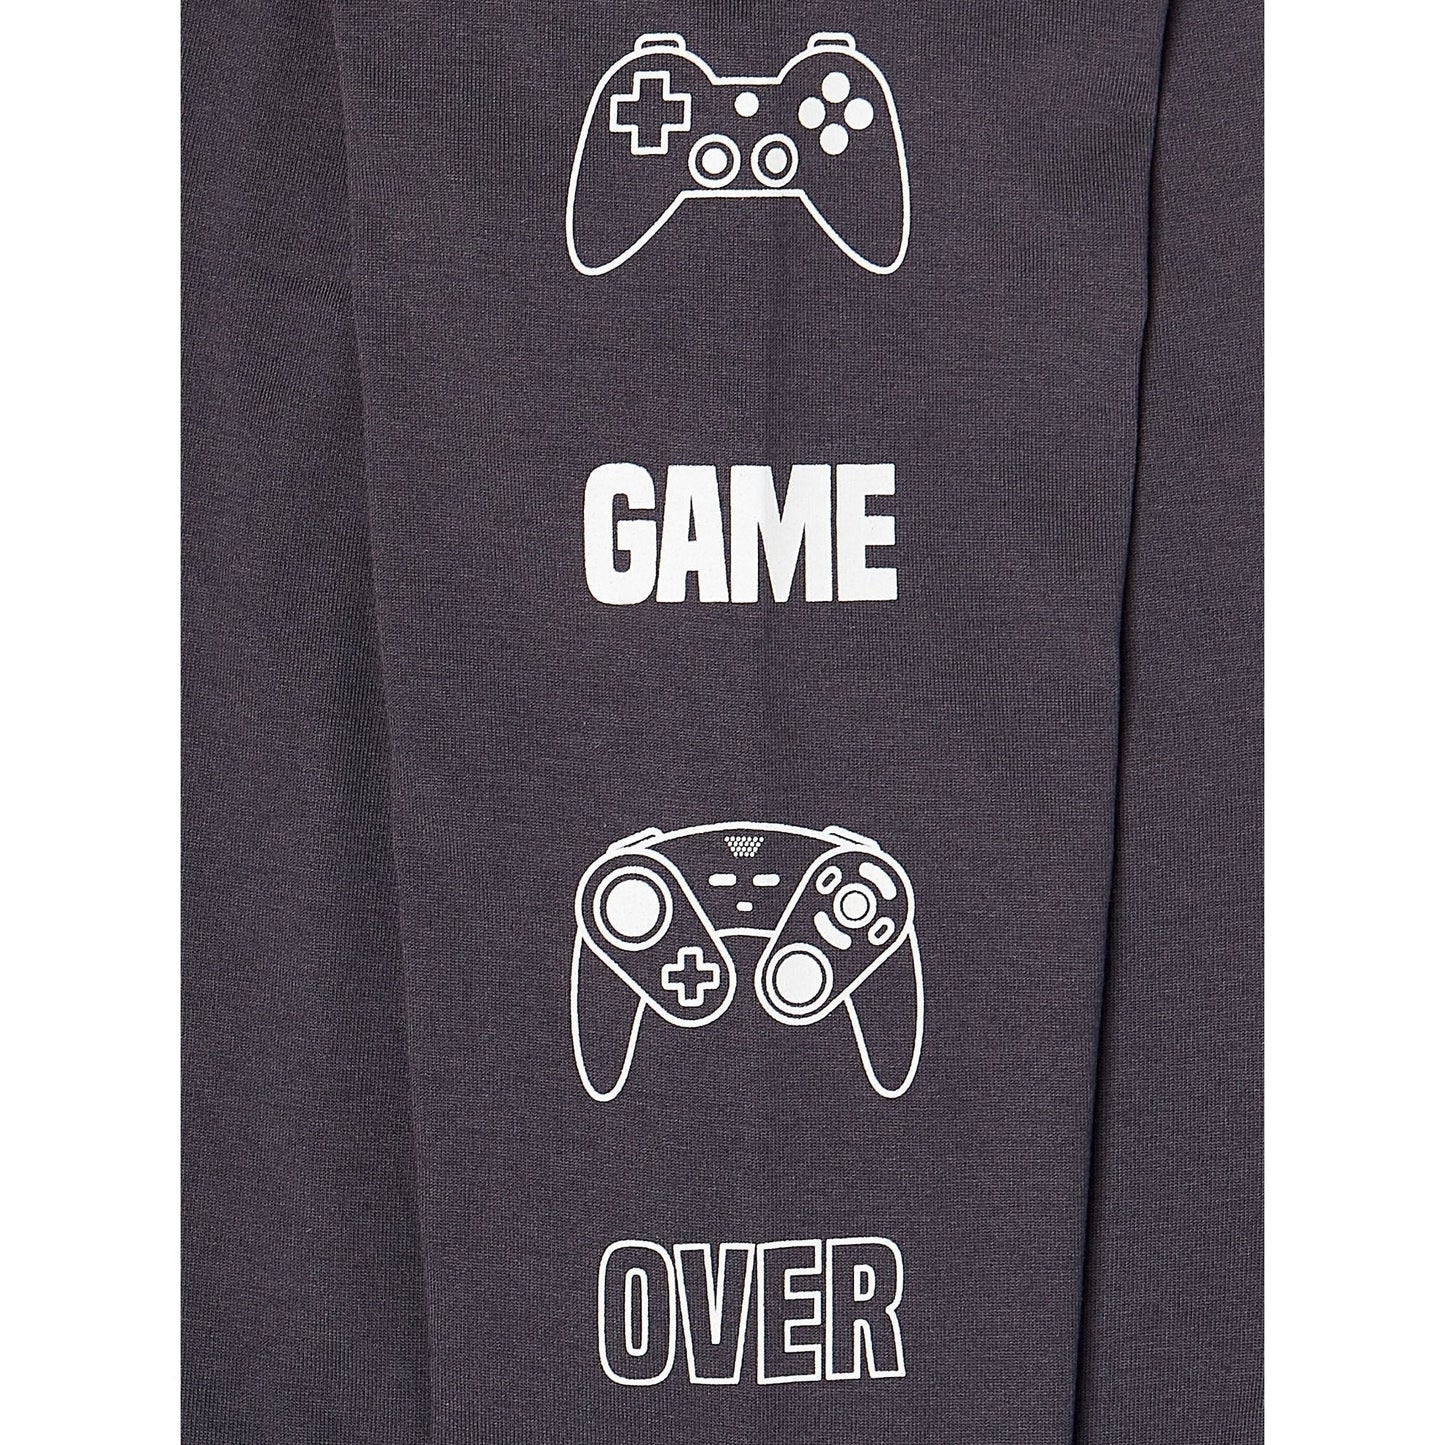 Boys Wonder Nation Next Level Gamer Graphic T-Shirt with Long Sleeves, Sizes 4-18 & Husky